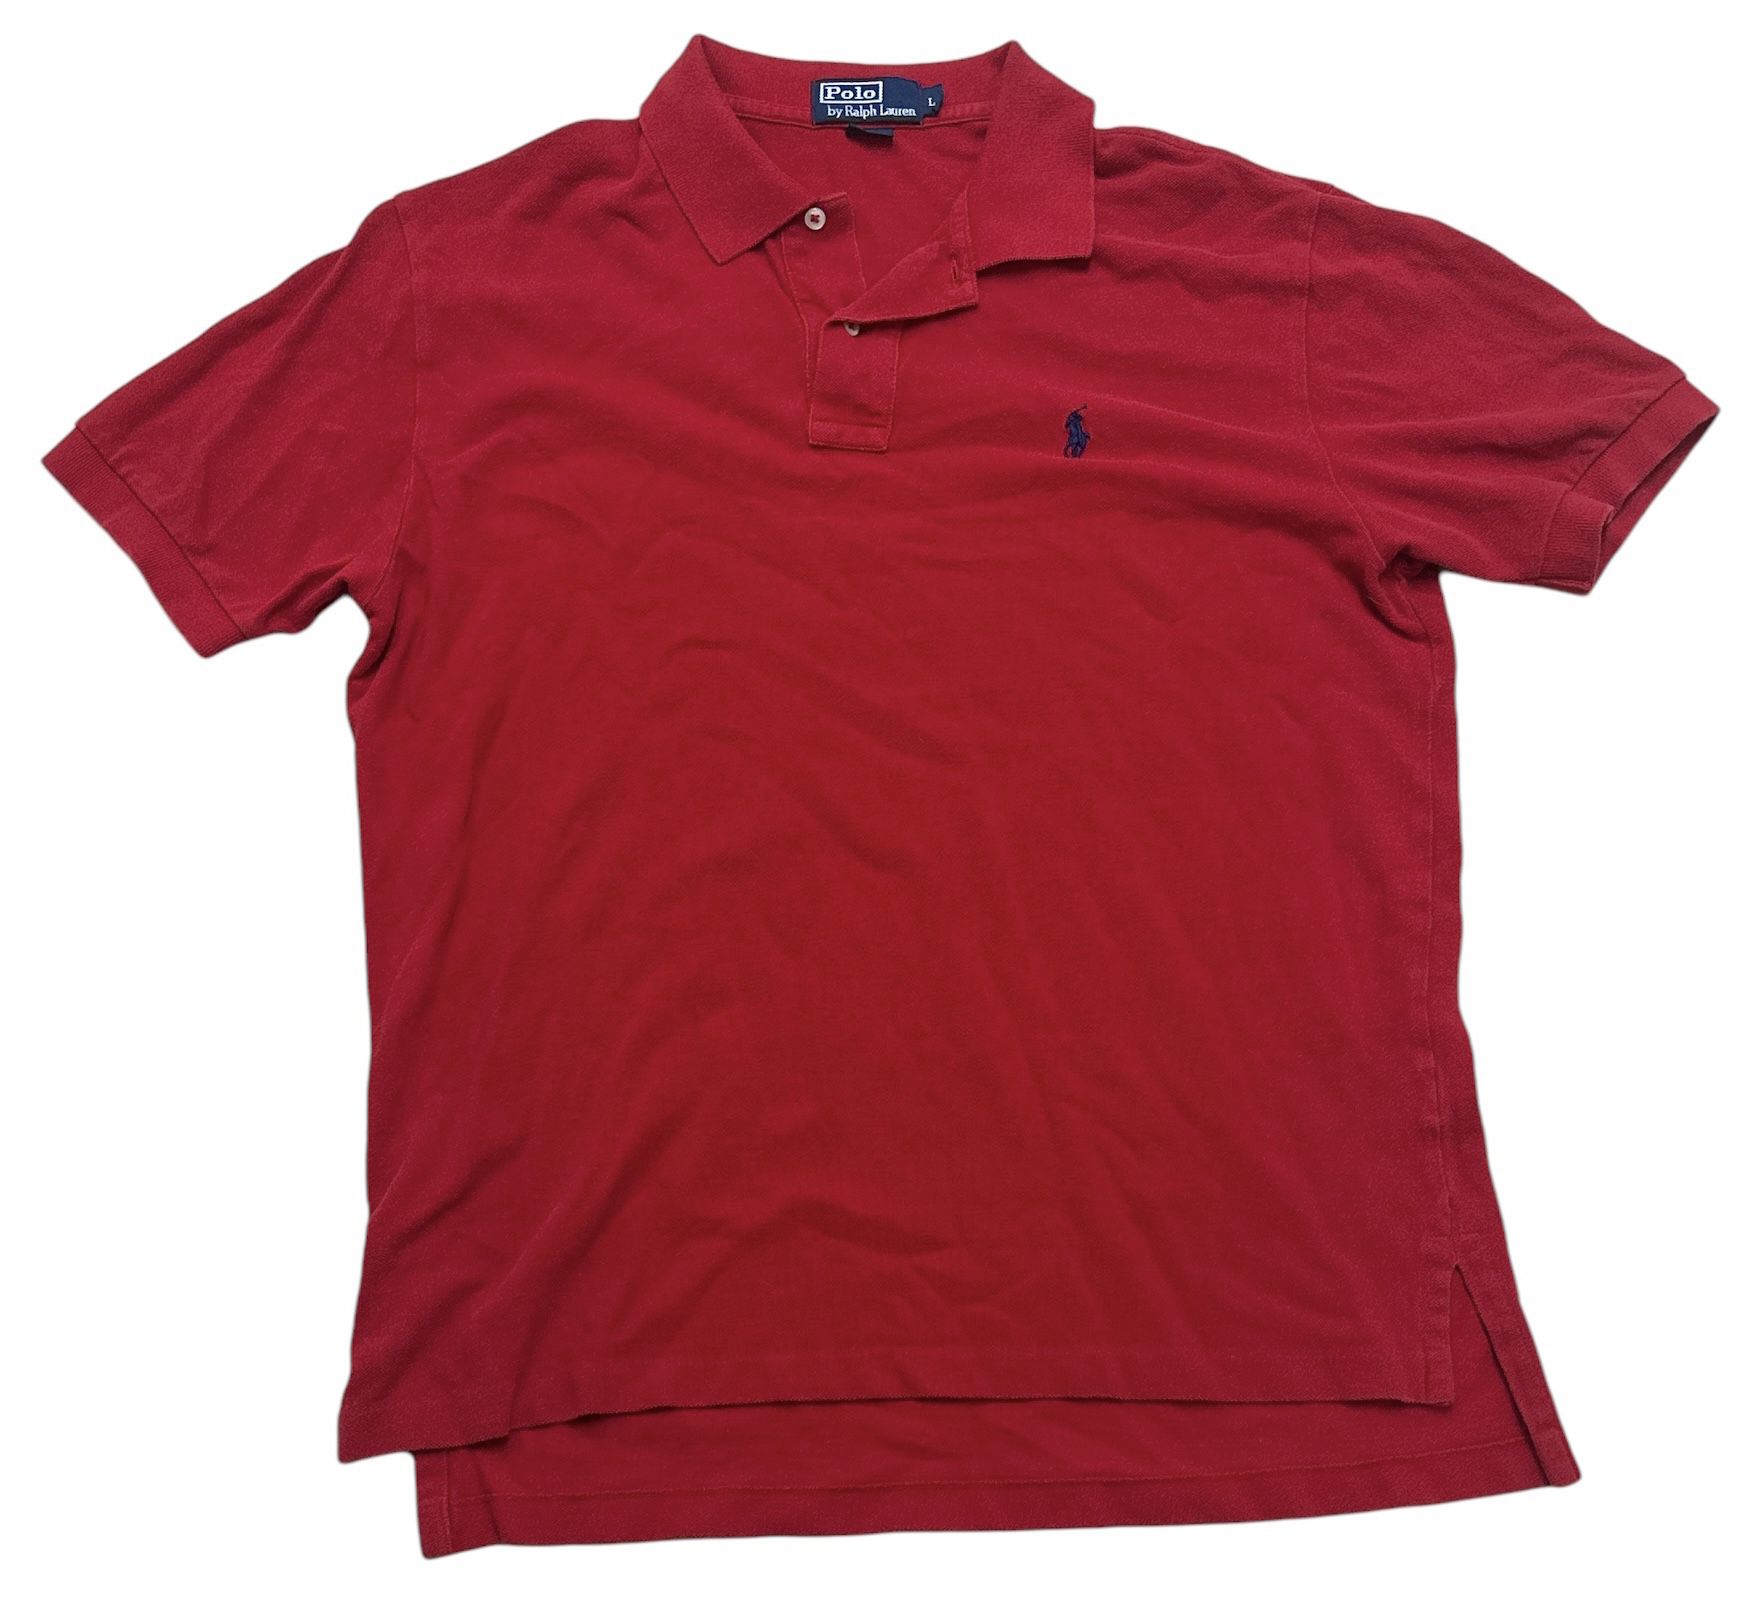 Polo by Ralph Lauren Men’s Red Blue Pony Mesh Casual Polo Shirt Size L